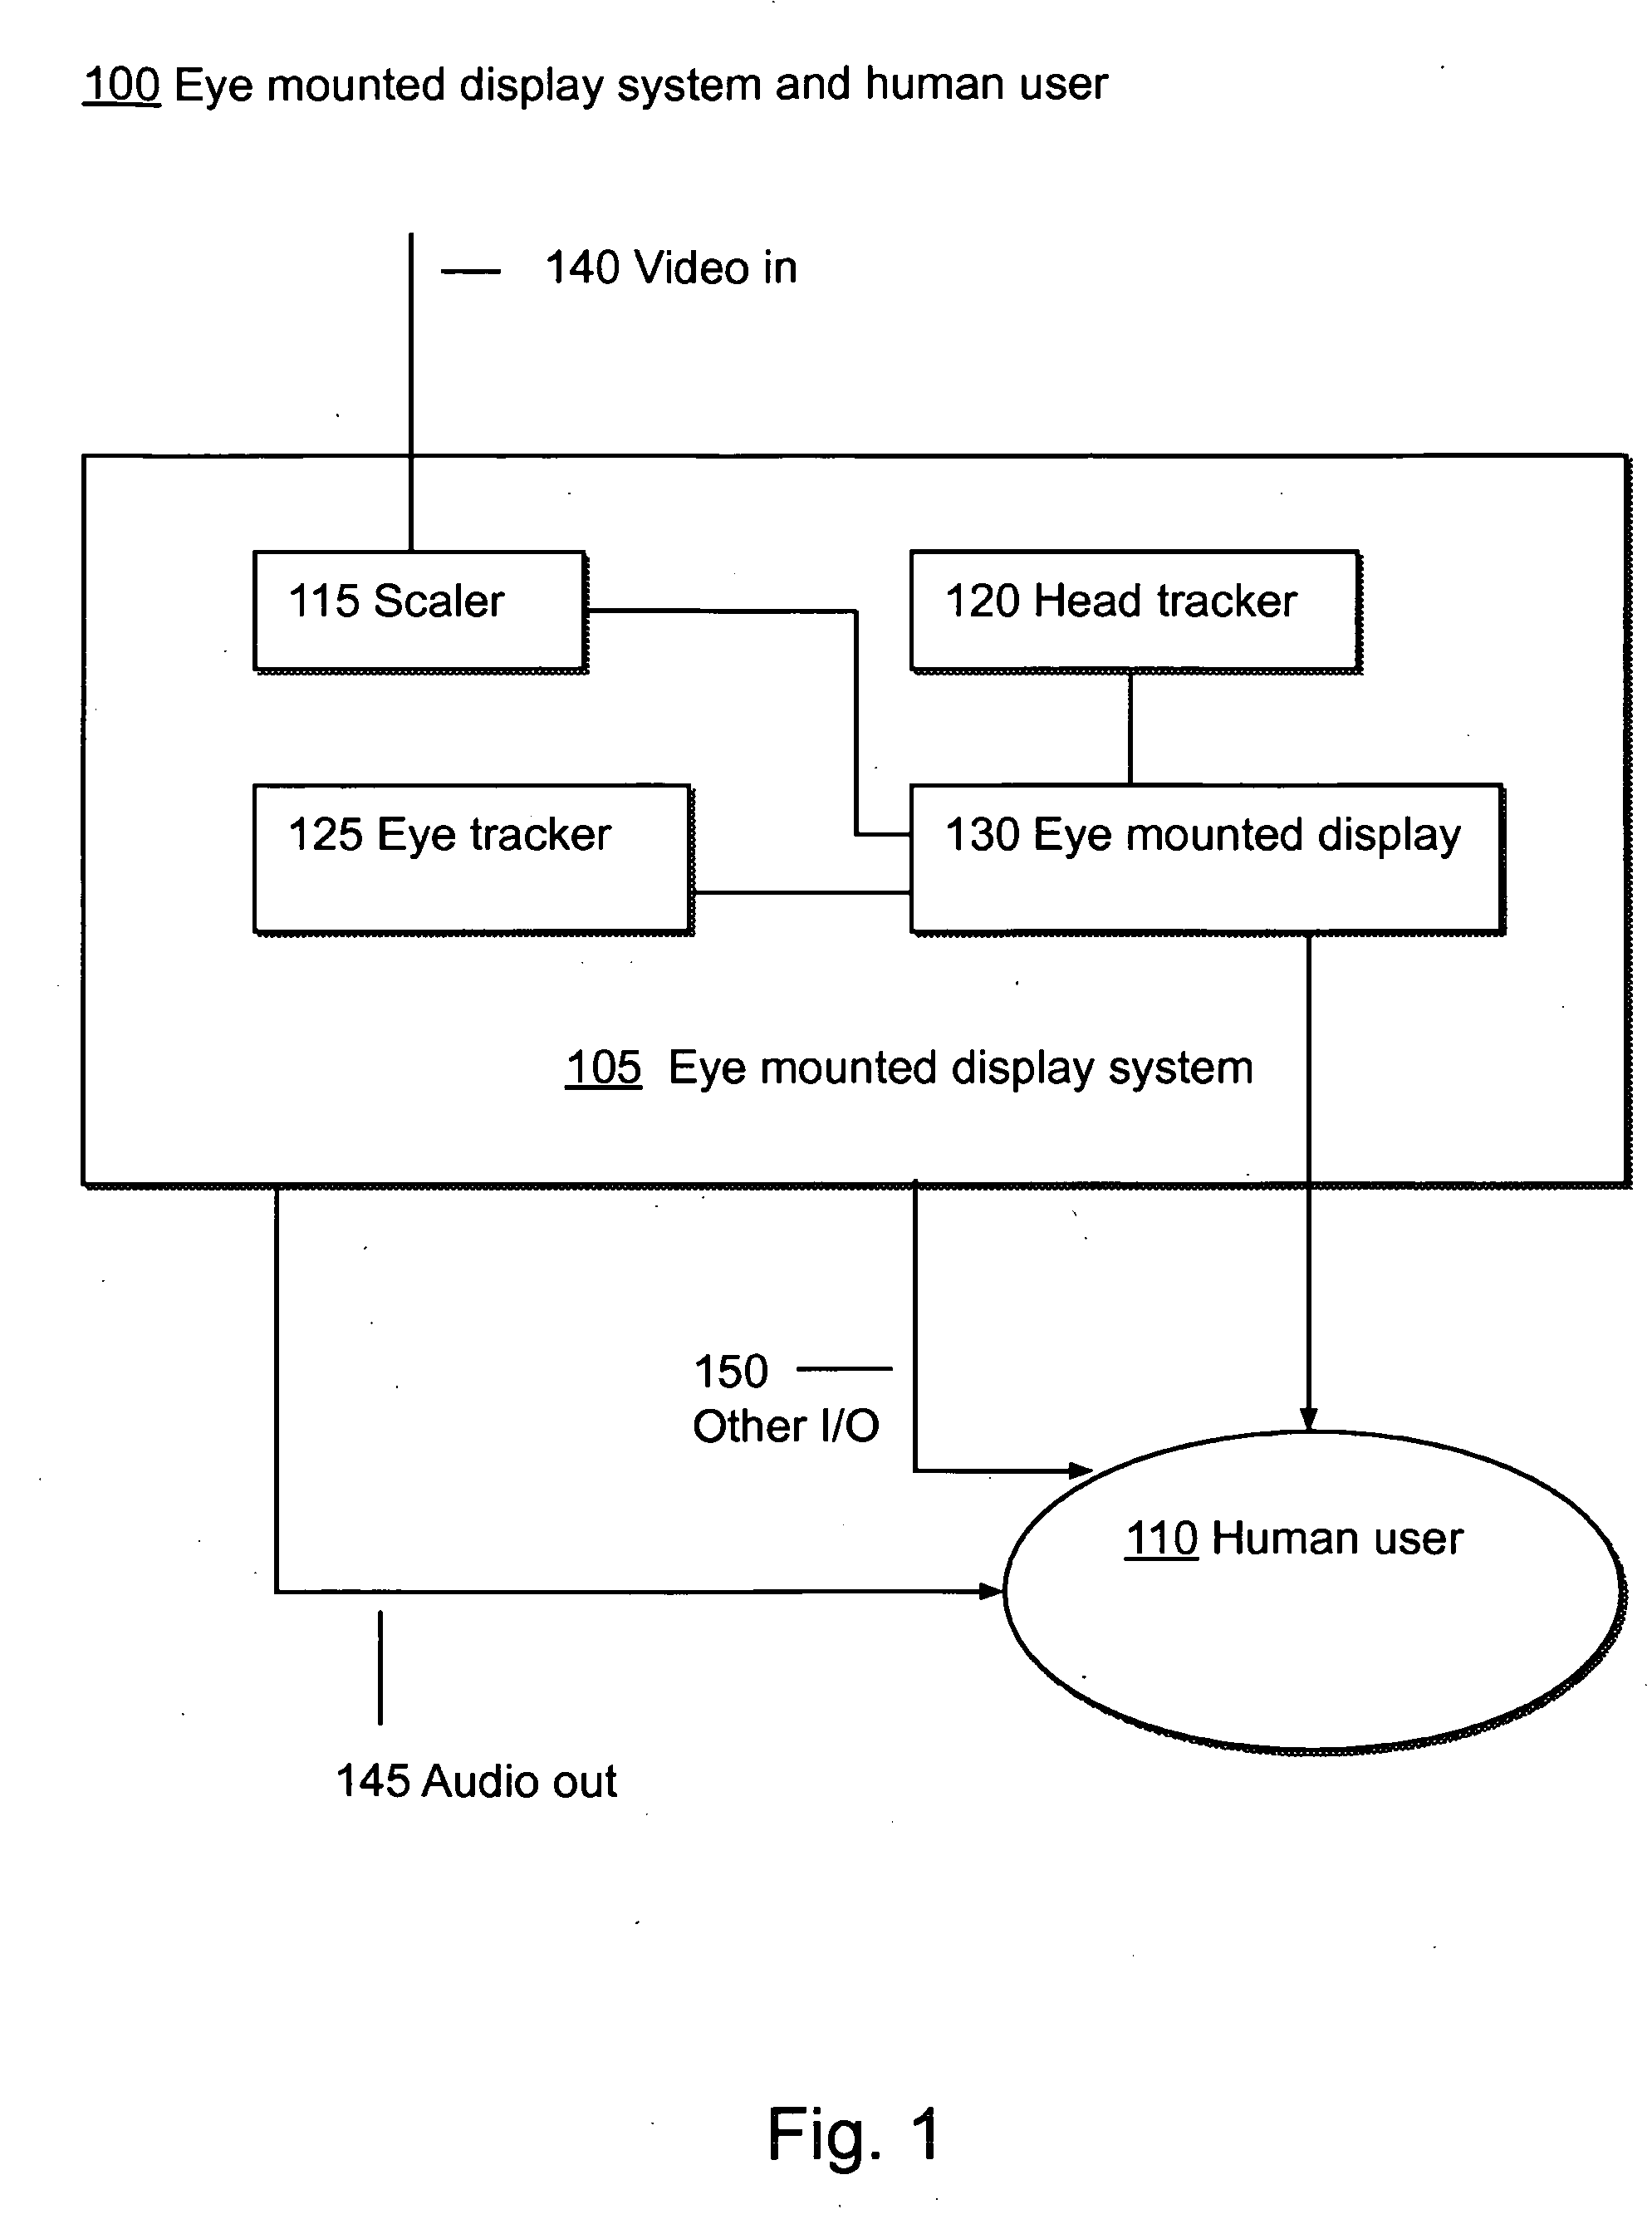 Systems Using Eye Mounted Displays